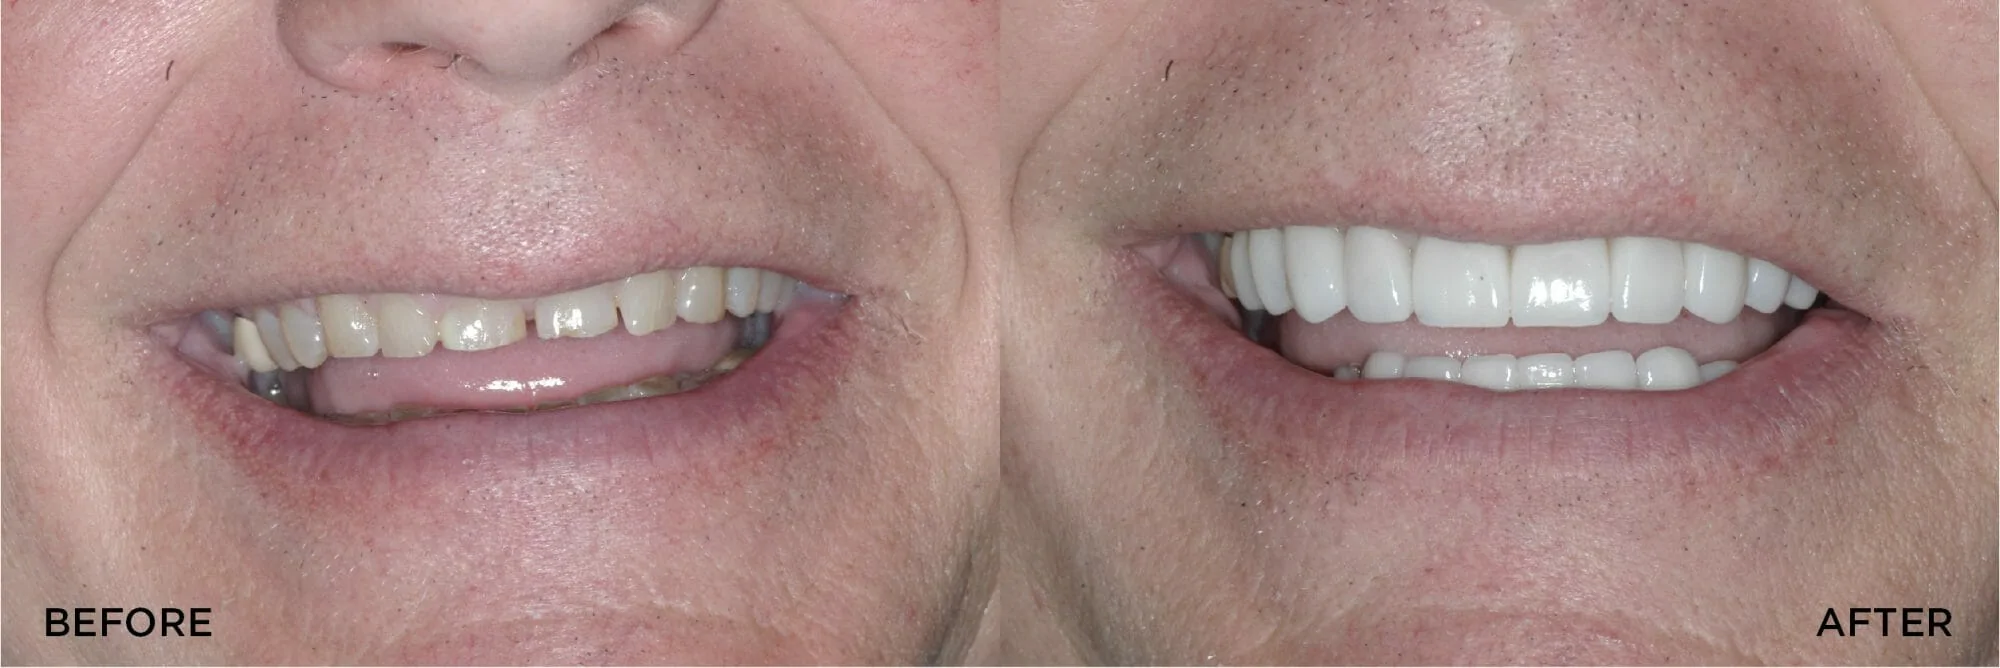 Full Mouth Rehab with Crowns Veneers"